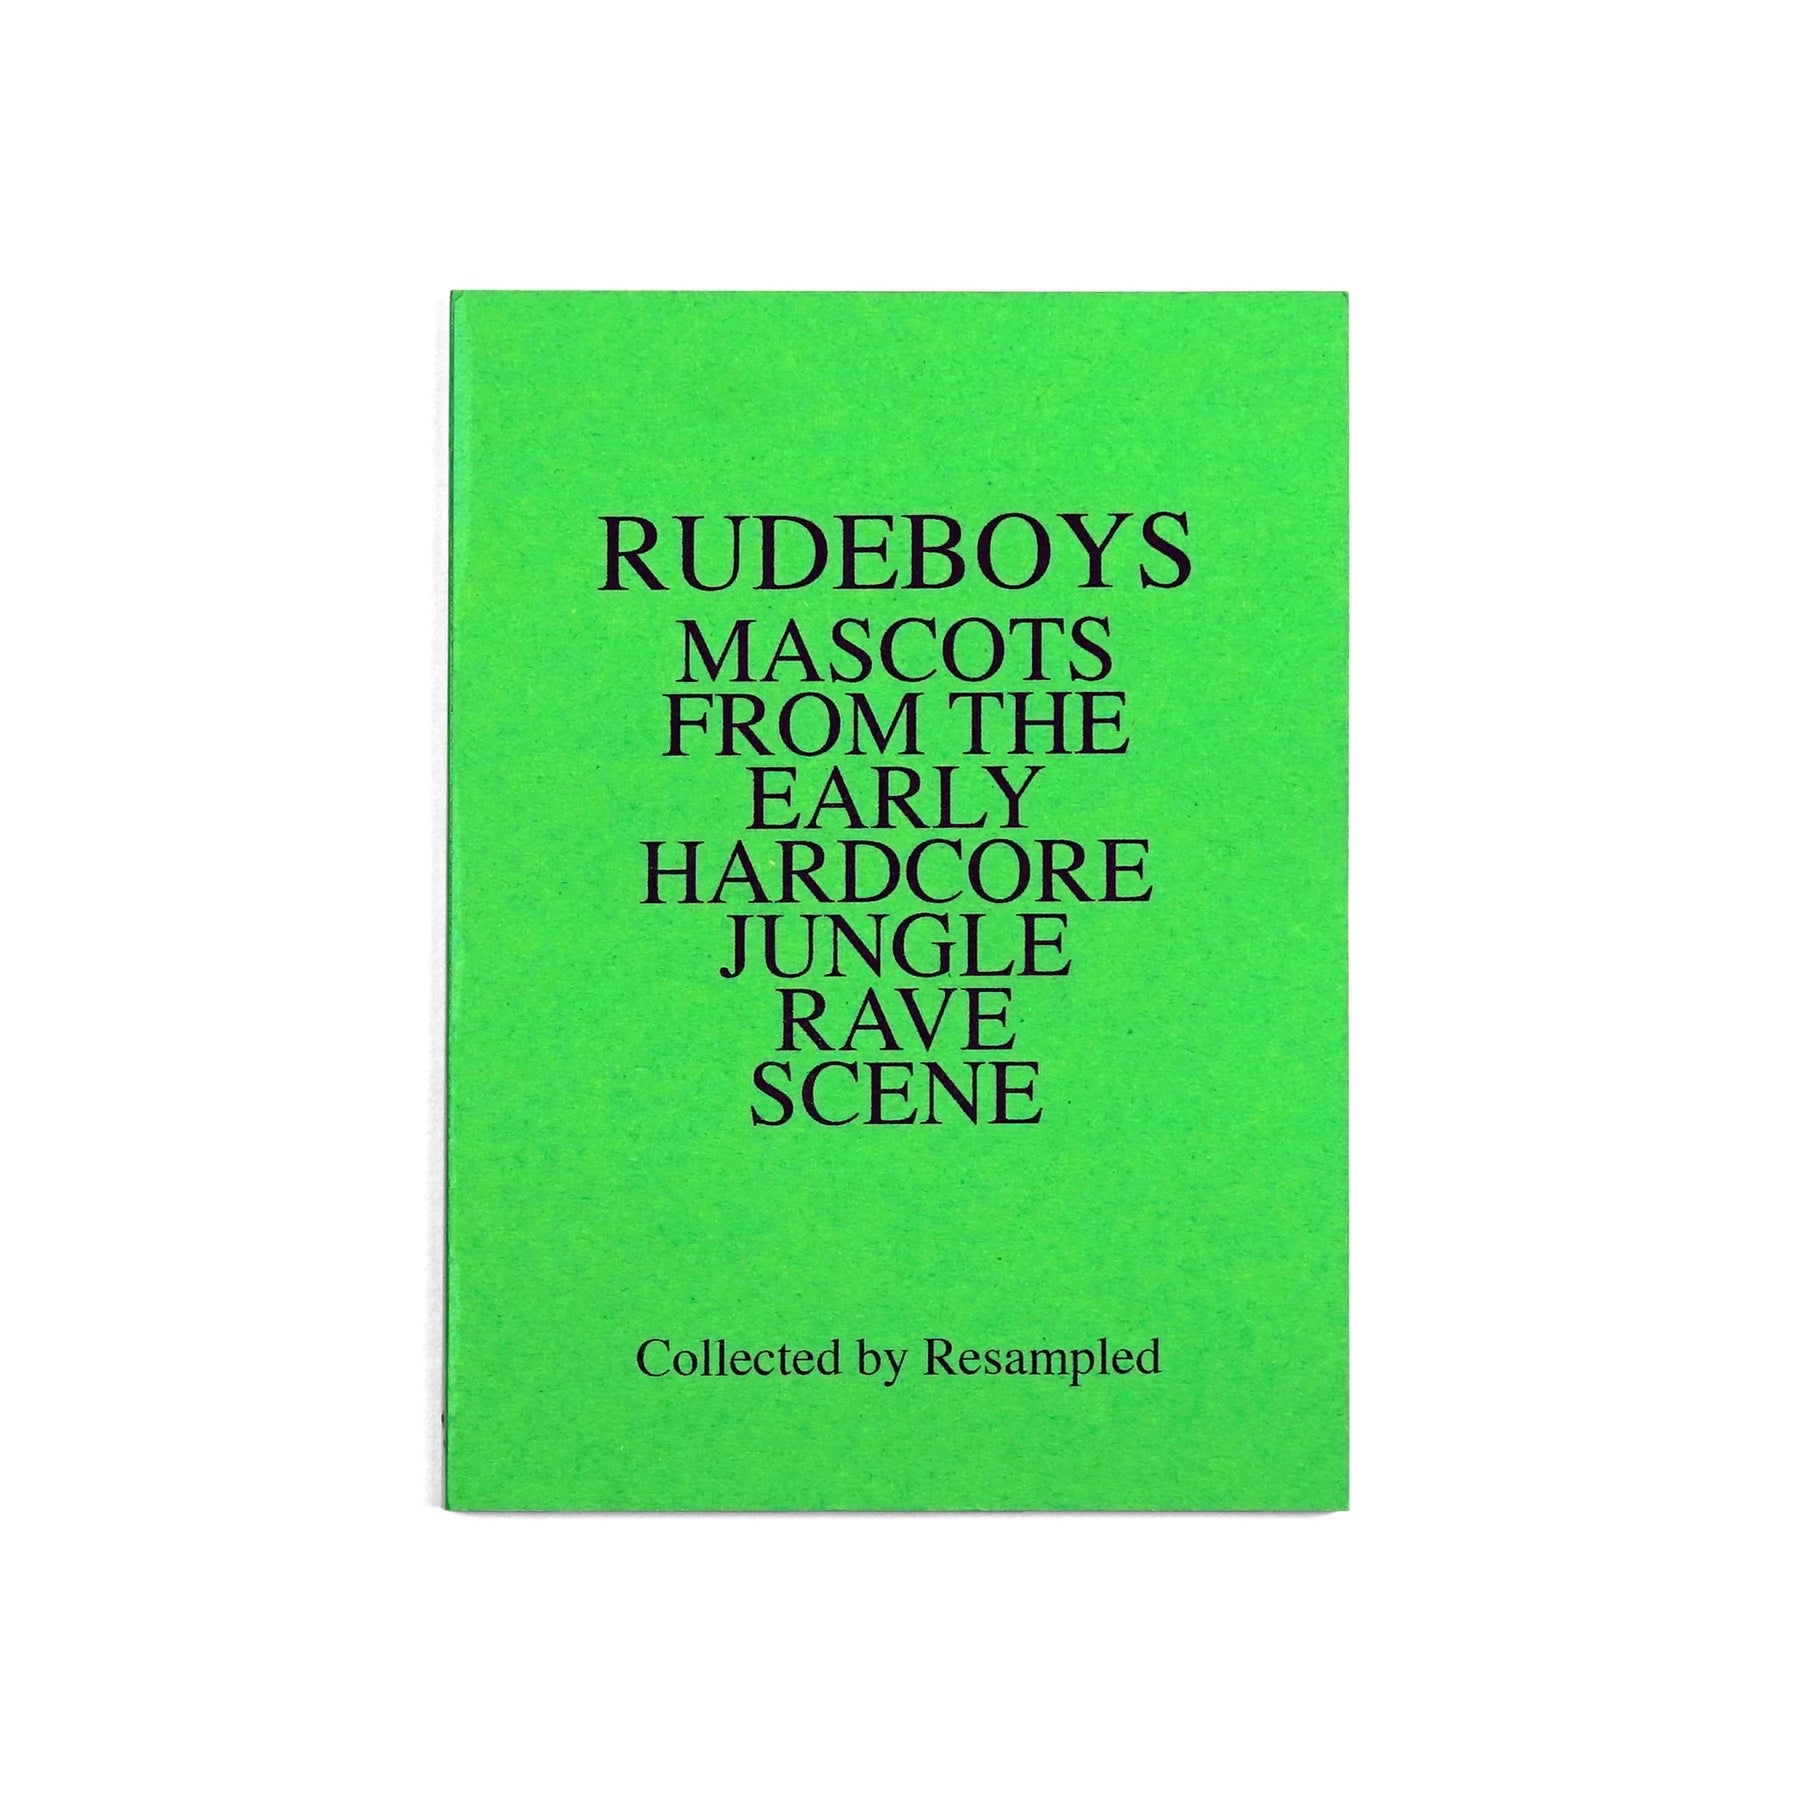 Rudeboys Mascots from the Early Hardcore Jungle Rave Scene